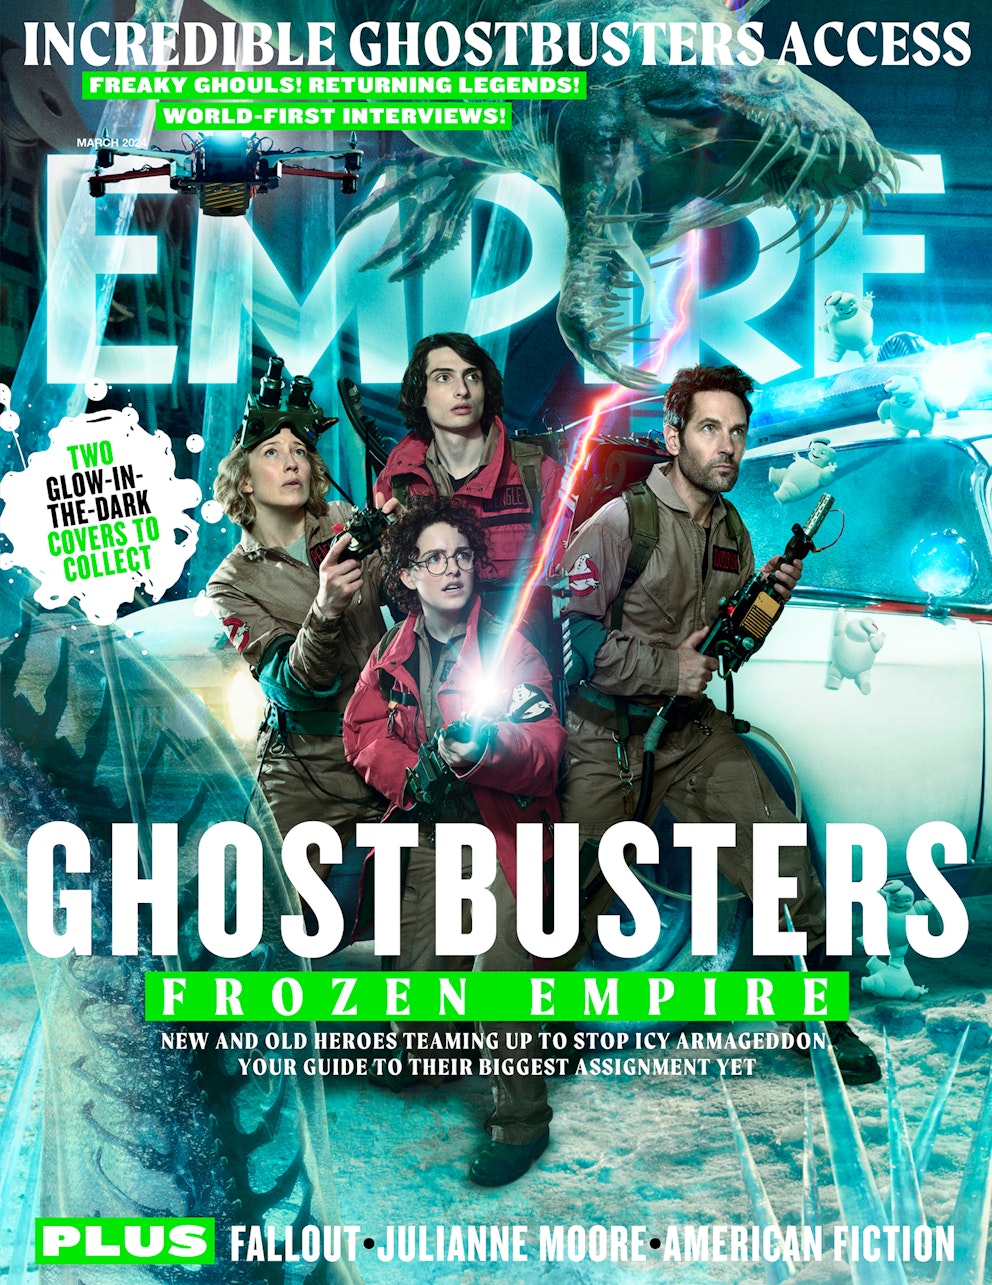 Ghostbusters Frozen Empire News Thread (Potential Afterlife Spoilers